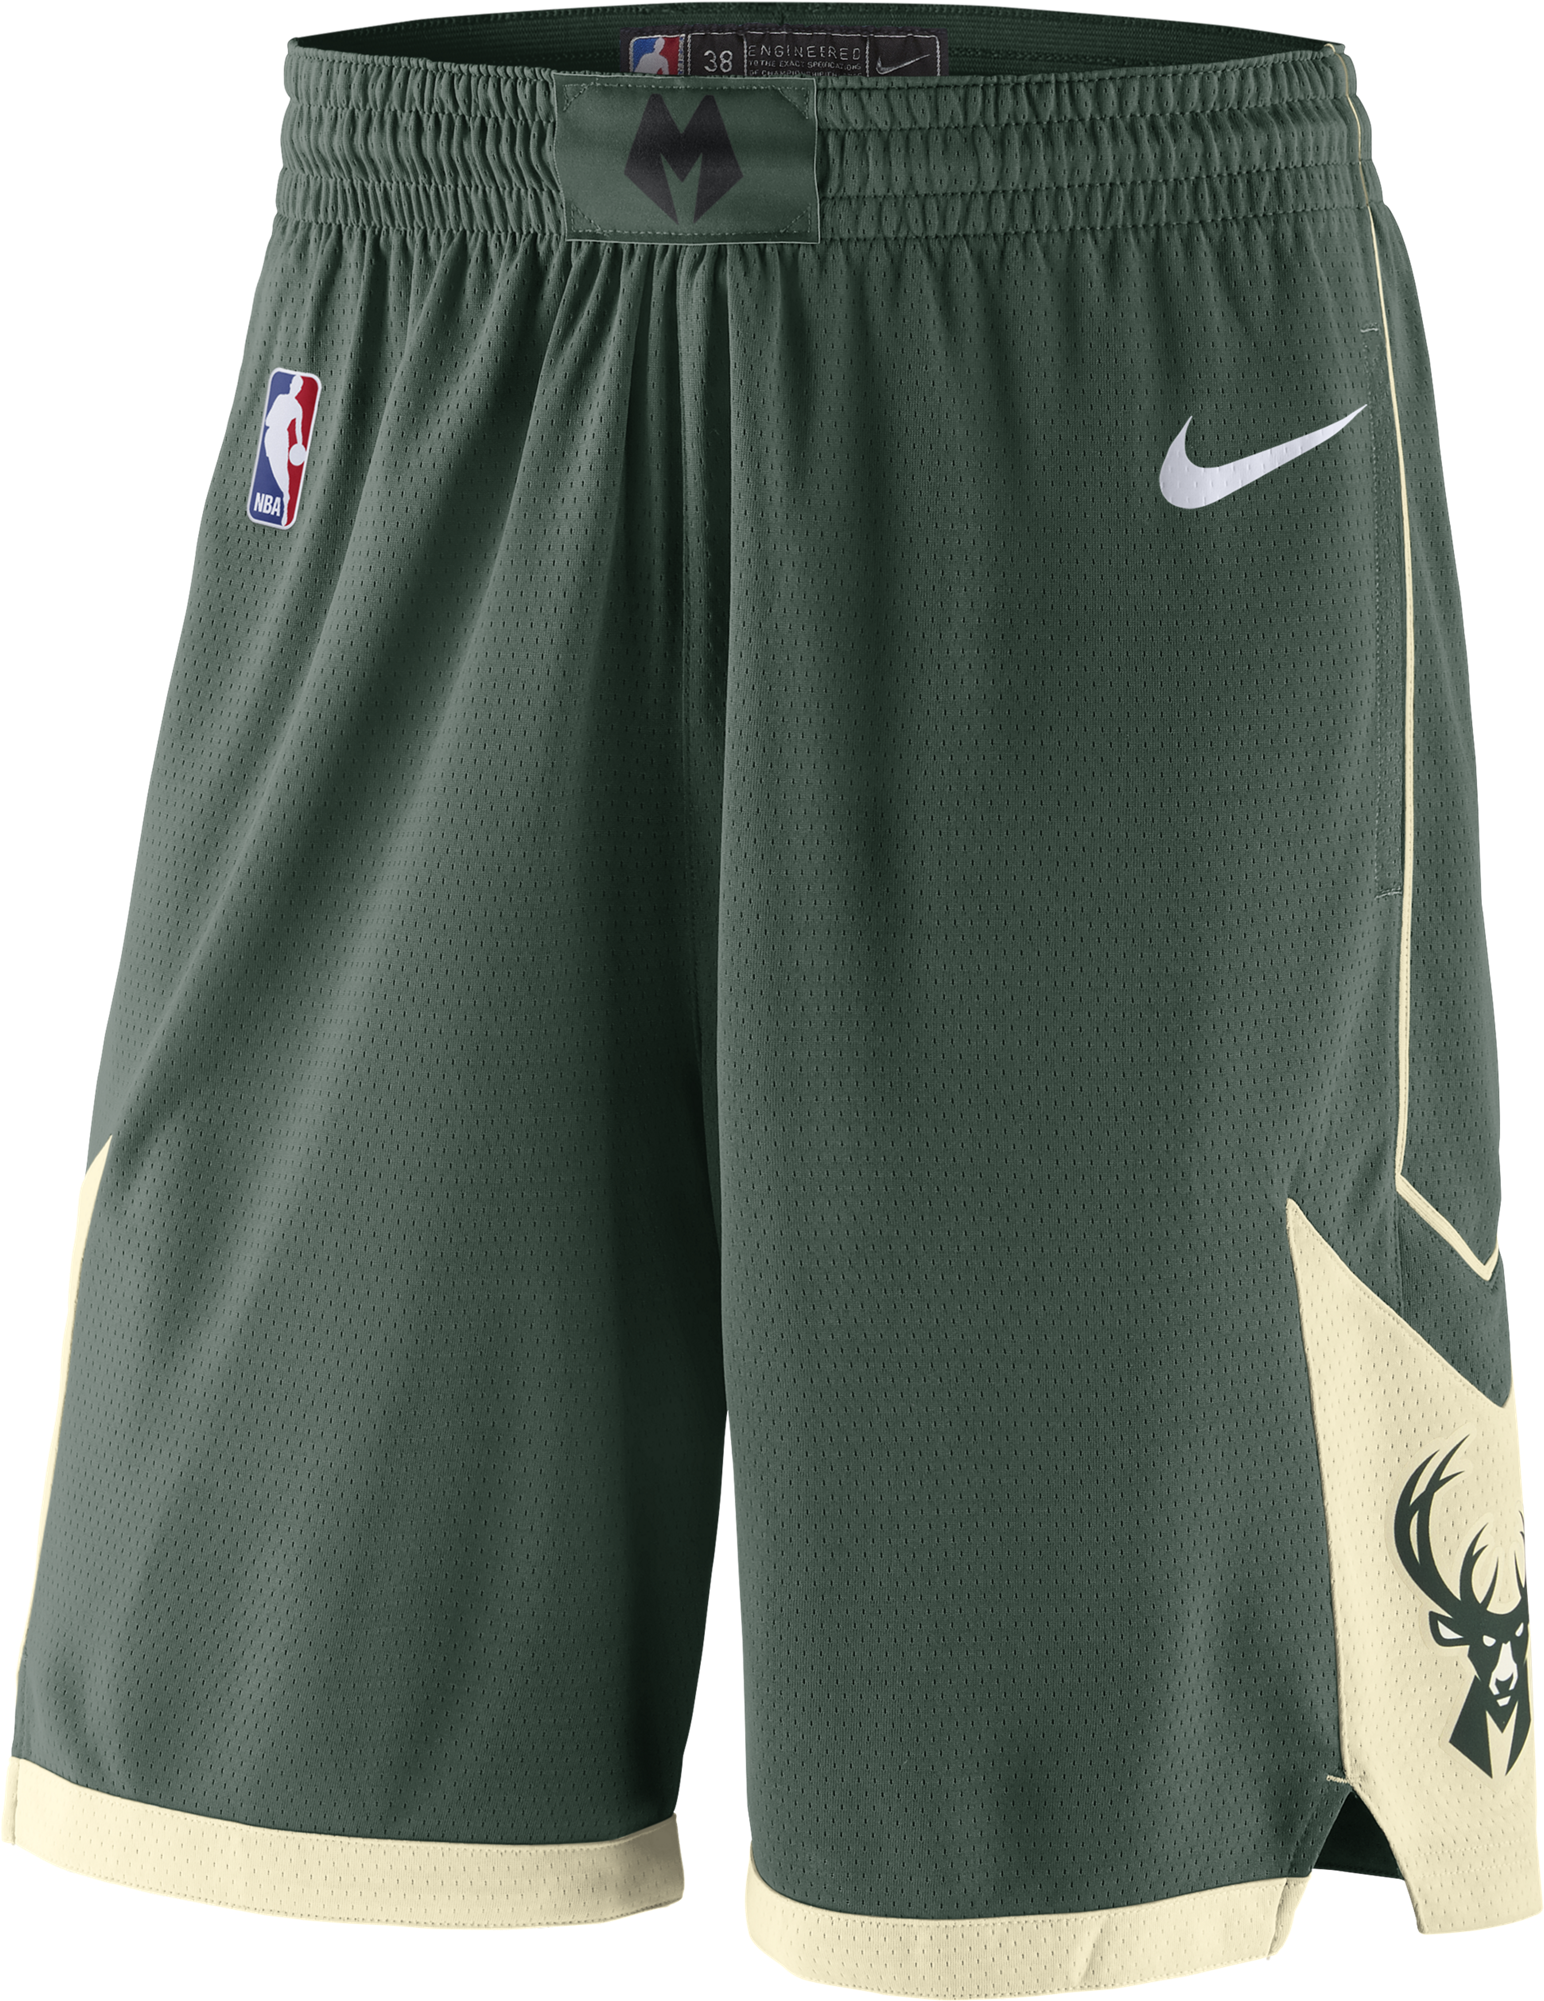 A Pair Of Green Shorts With A White Logo